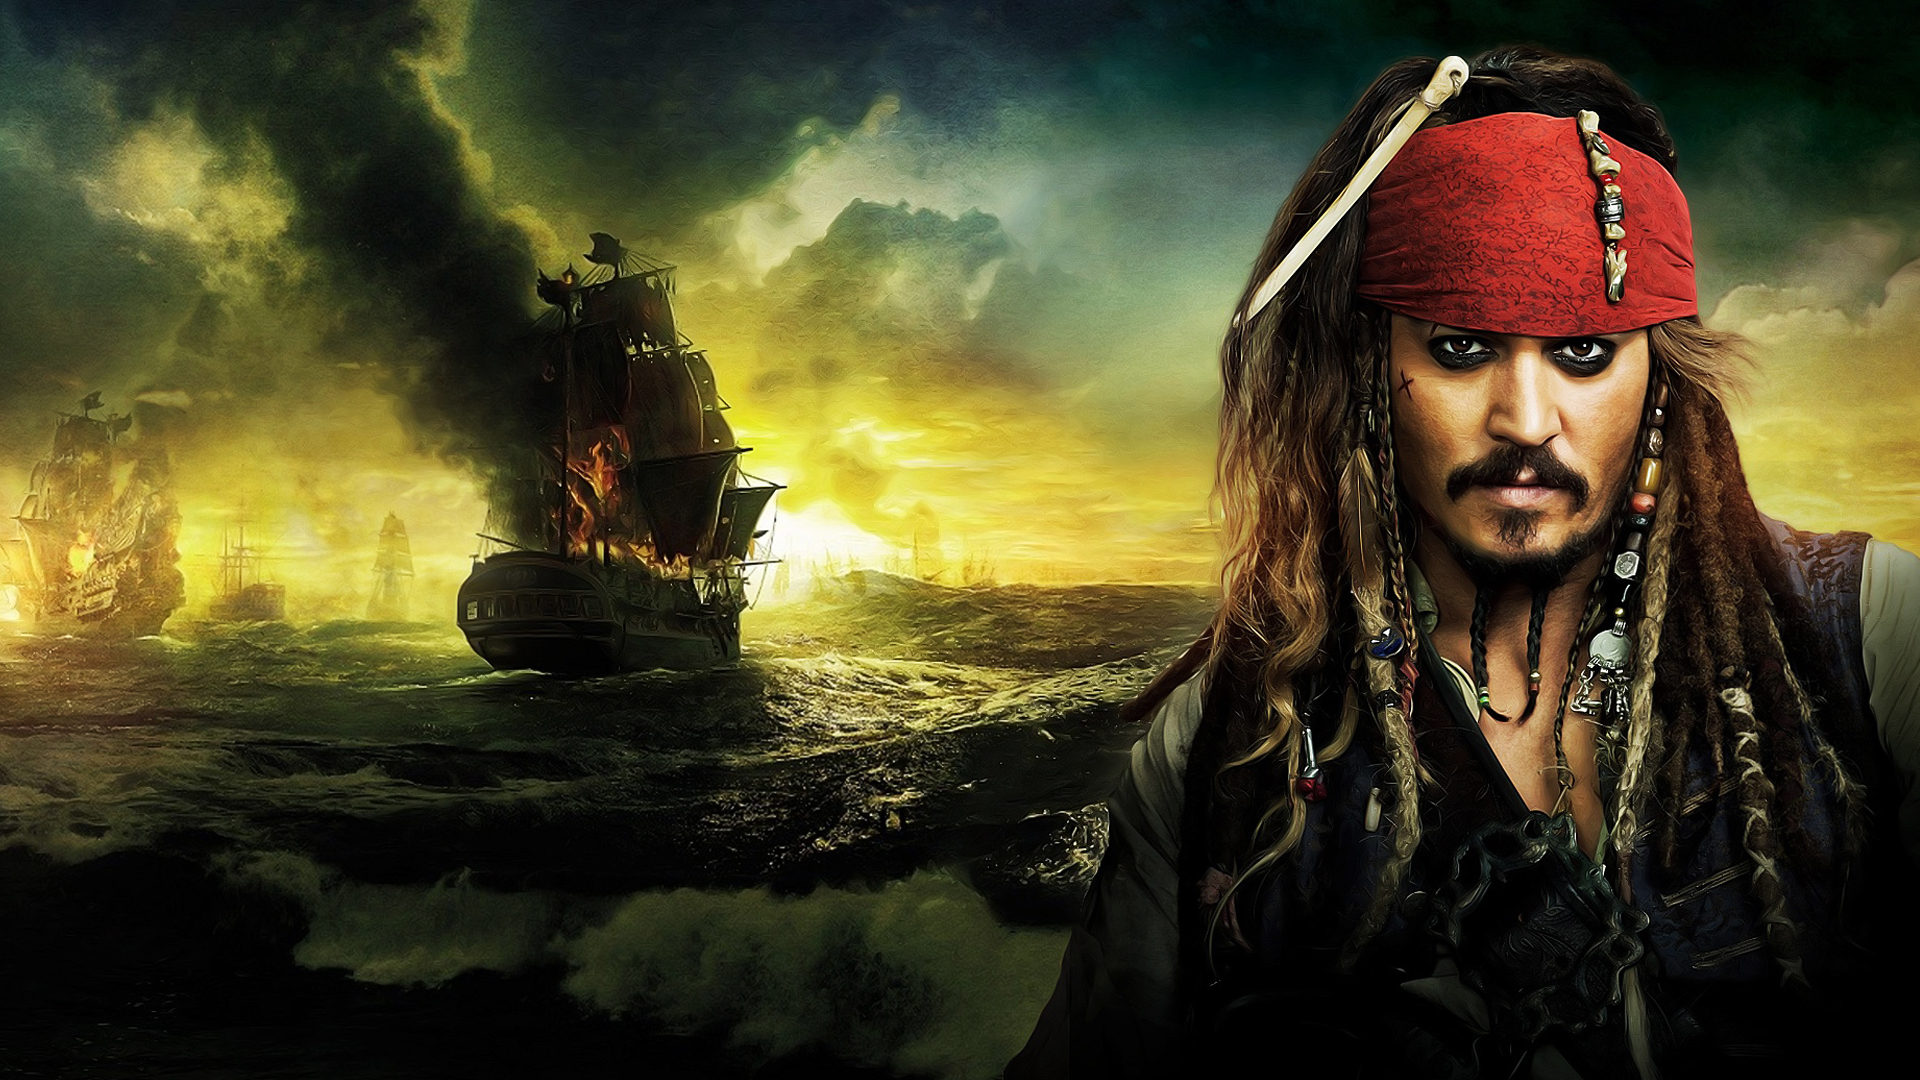 Pirates Of The Caribbean Wallpaper Hebus Org High